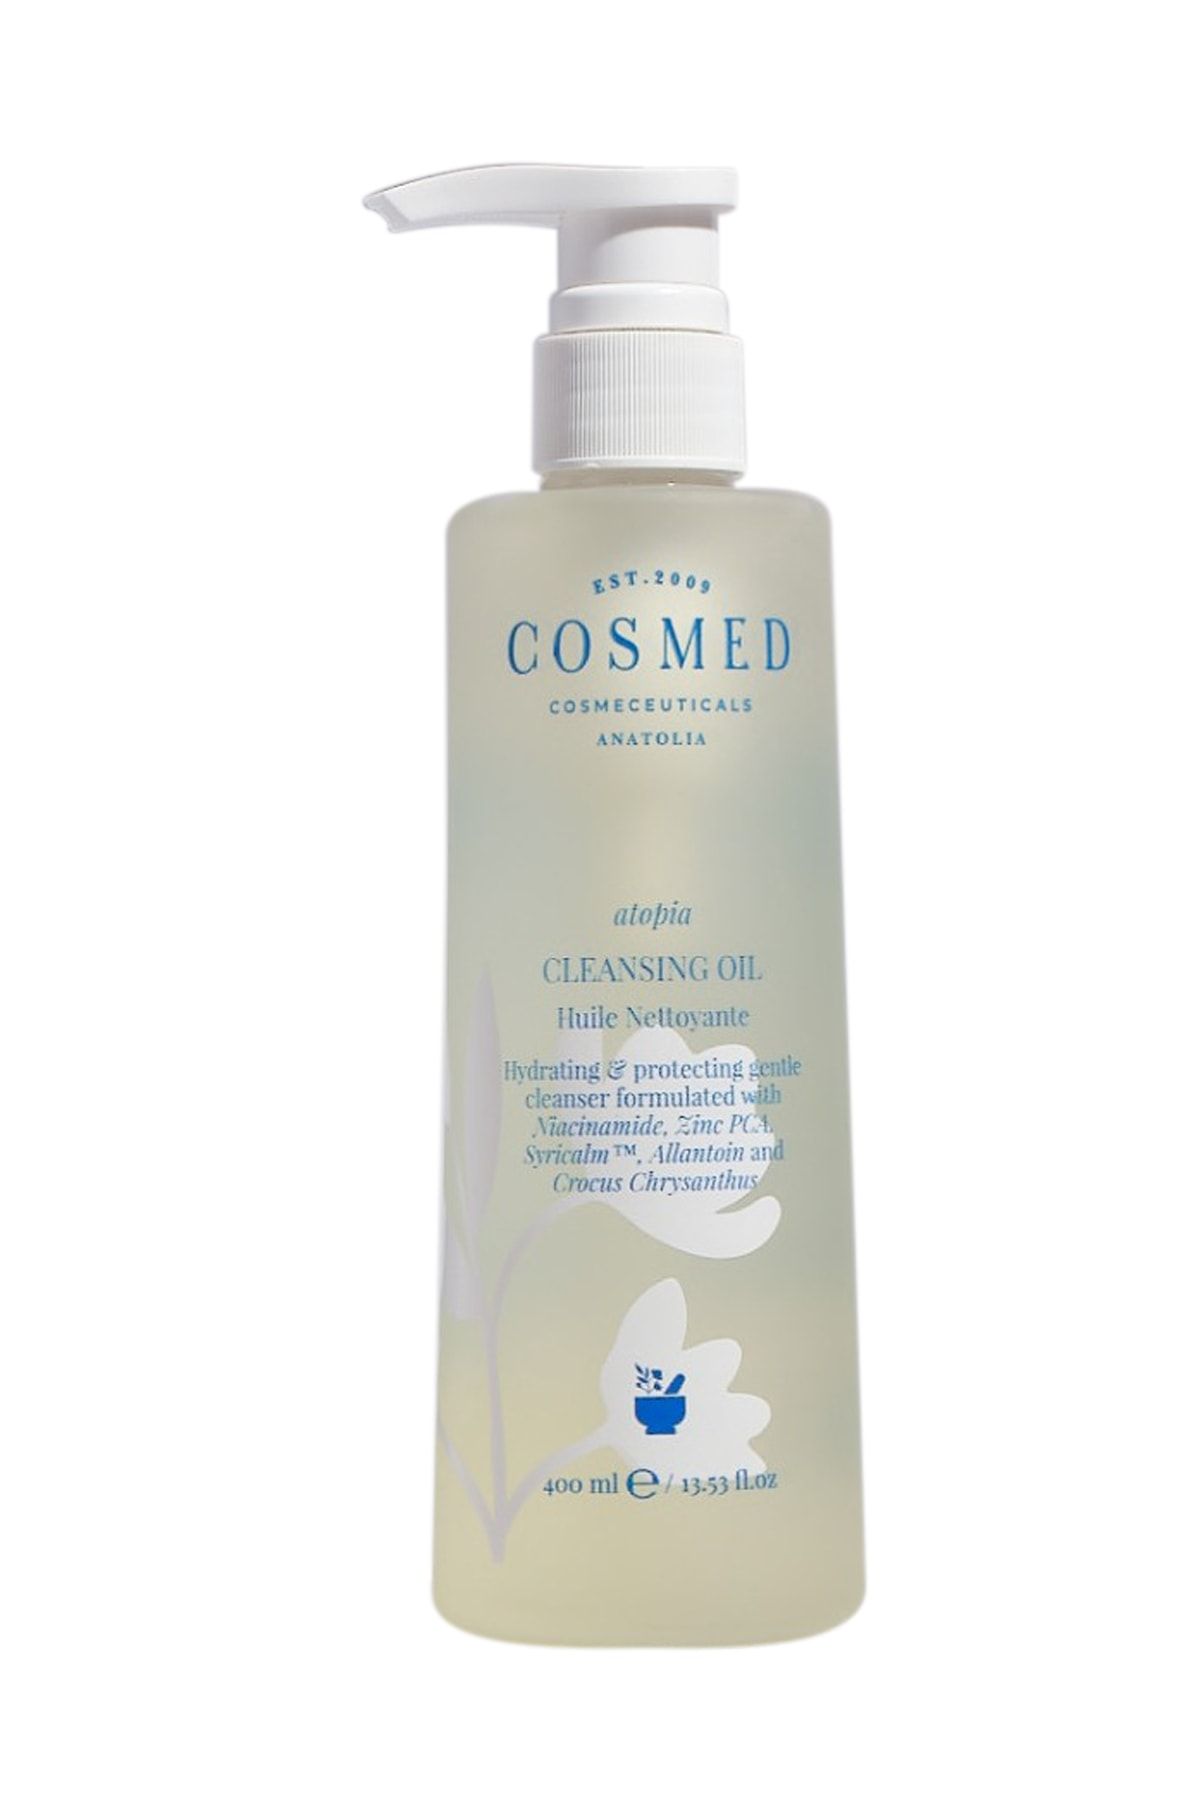 COSMED Atopia Cleansing Oil 400 ml Yeni